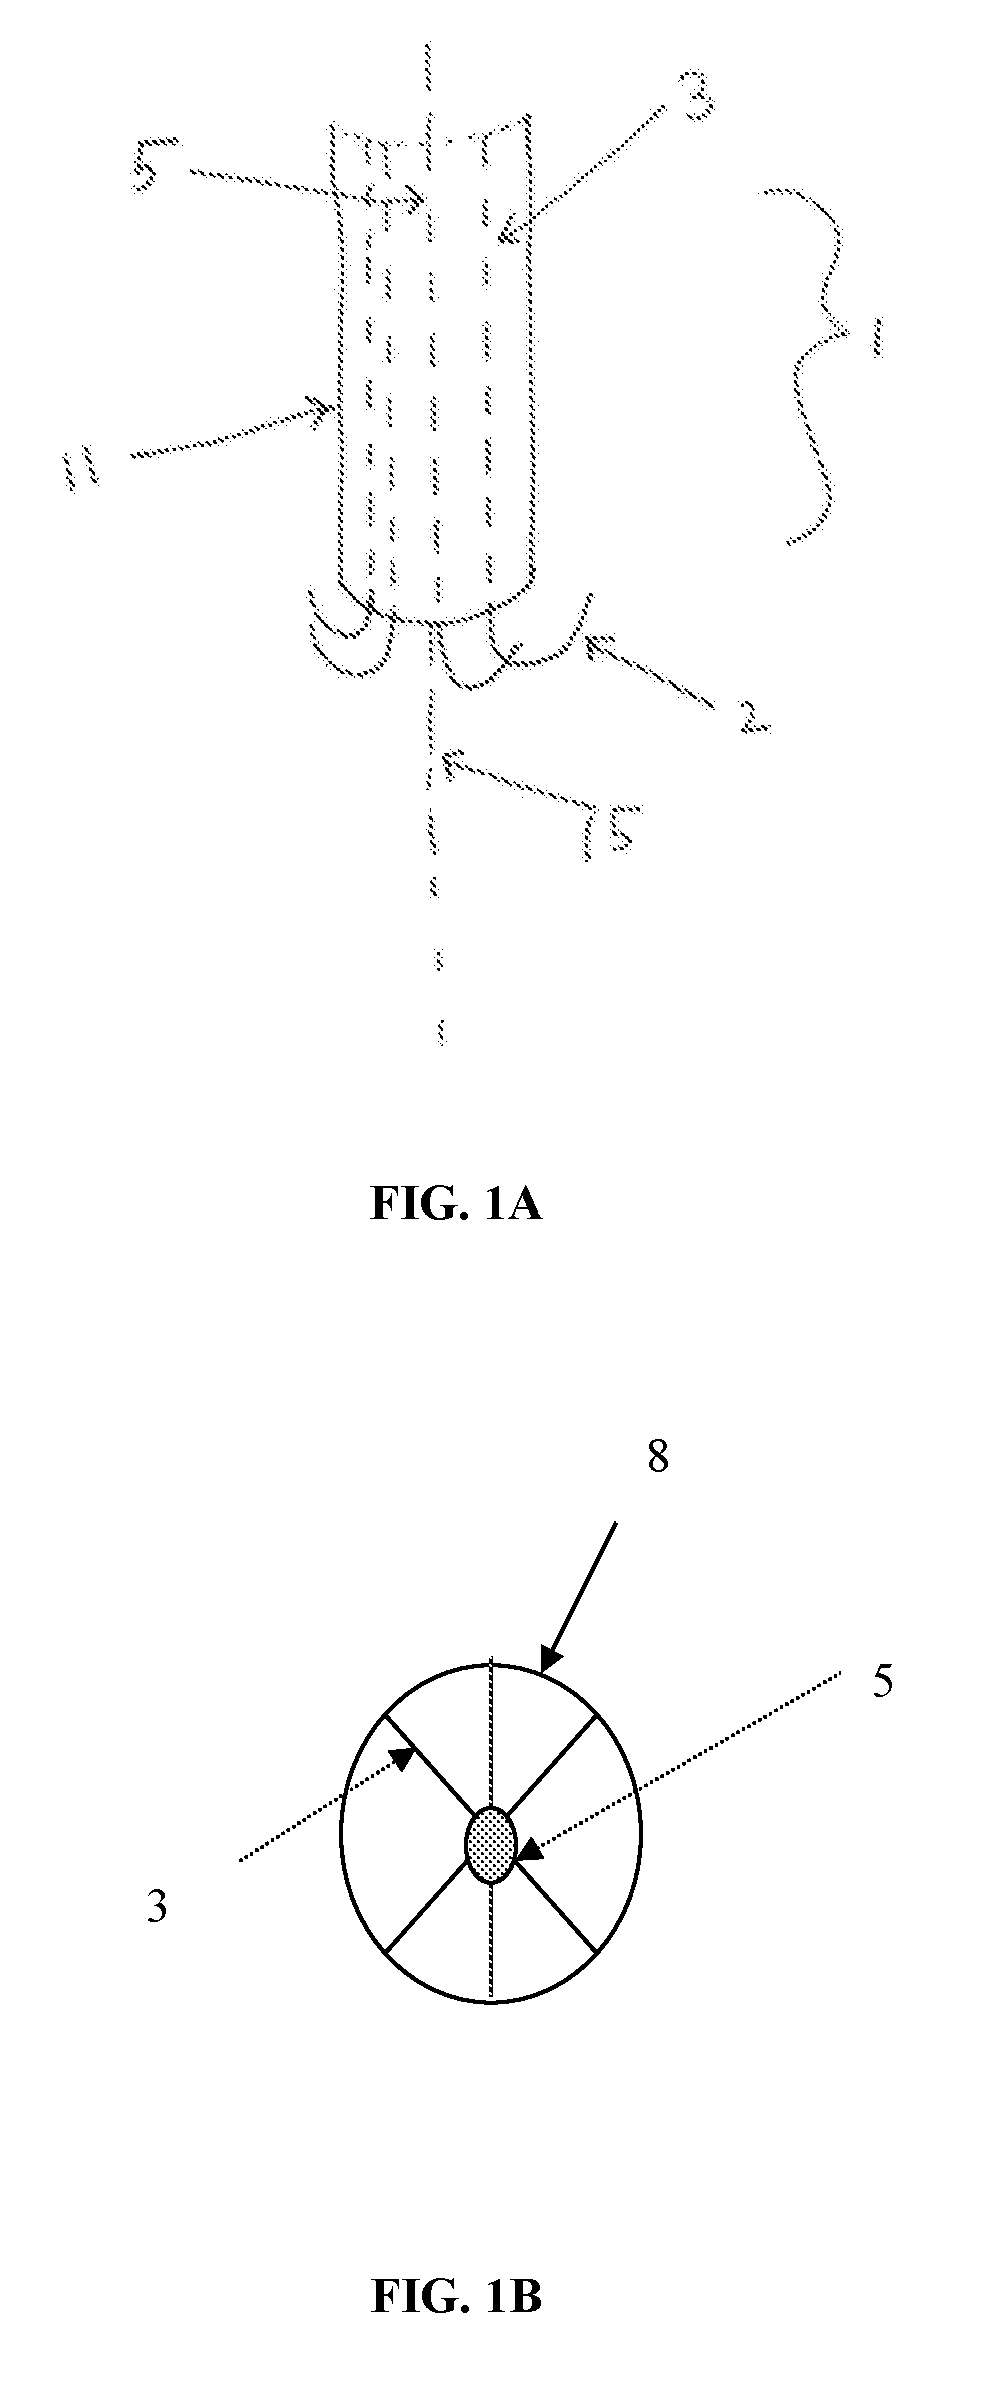 Method and device for tissue acquisition or closure